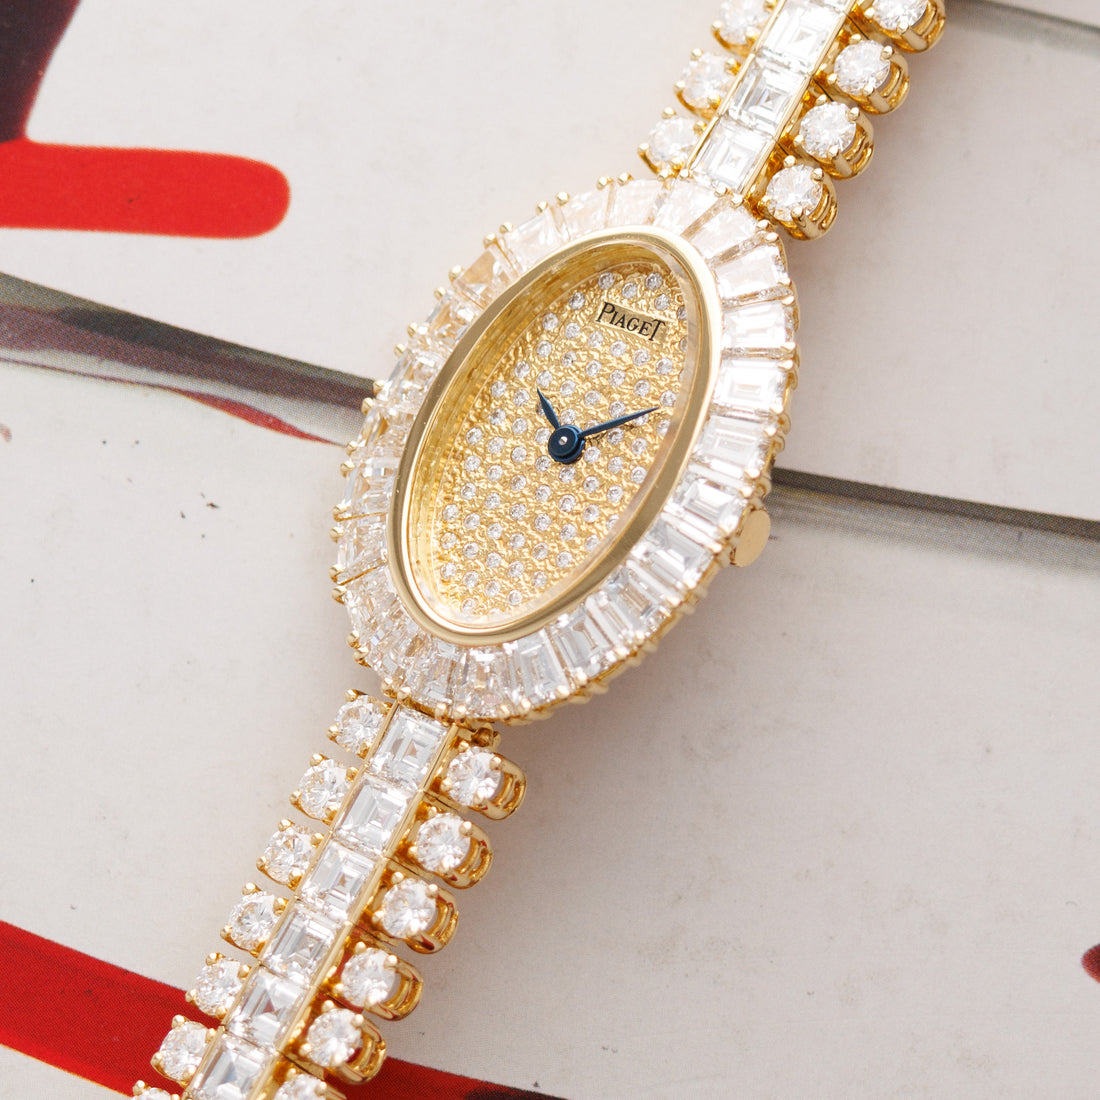 Piaget Yellow Gold Baguette Bezel with Pave Dial and Diamonds Bracelet